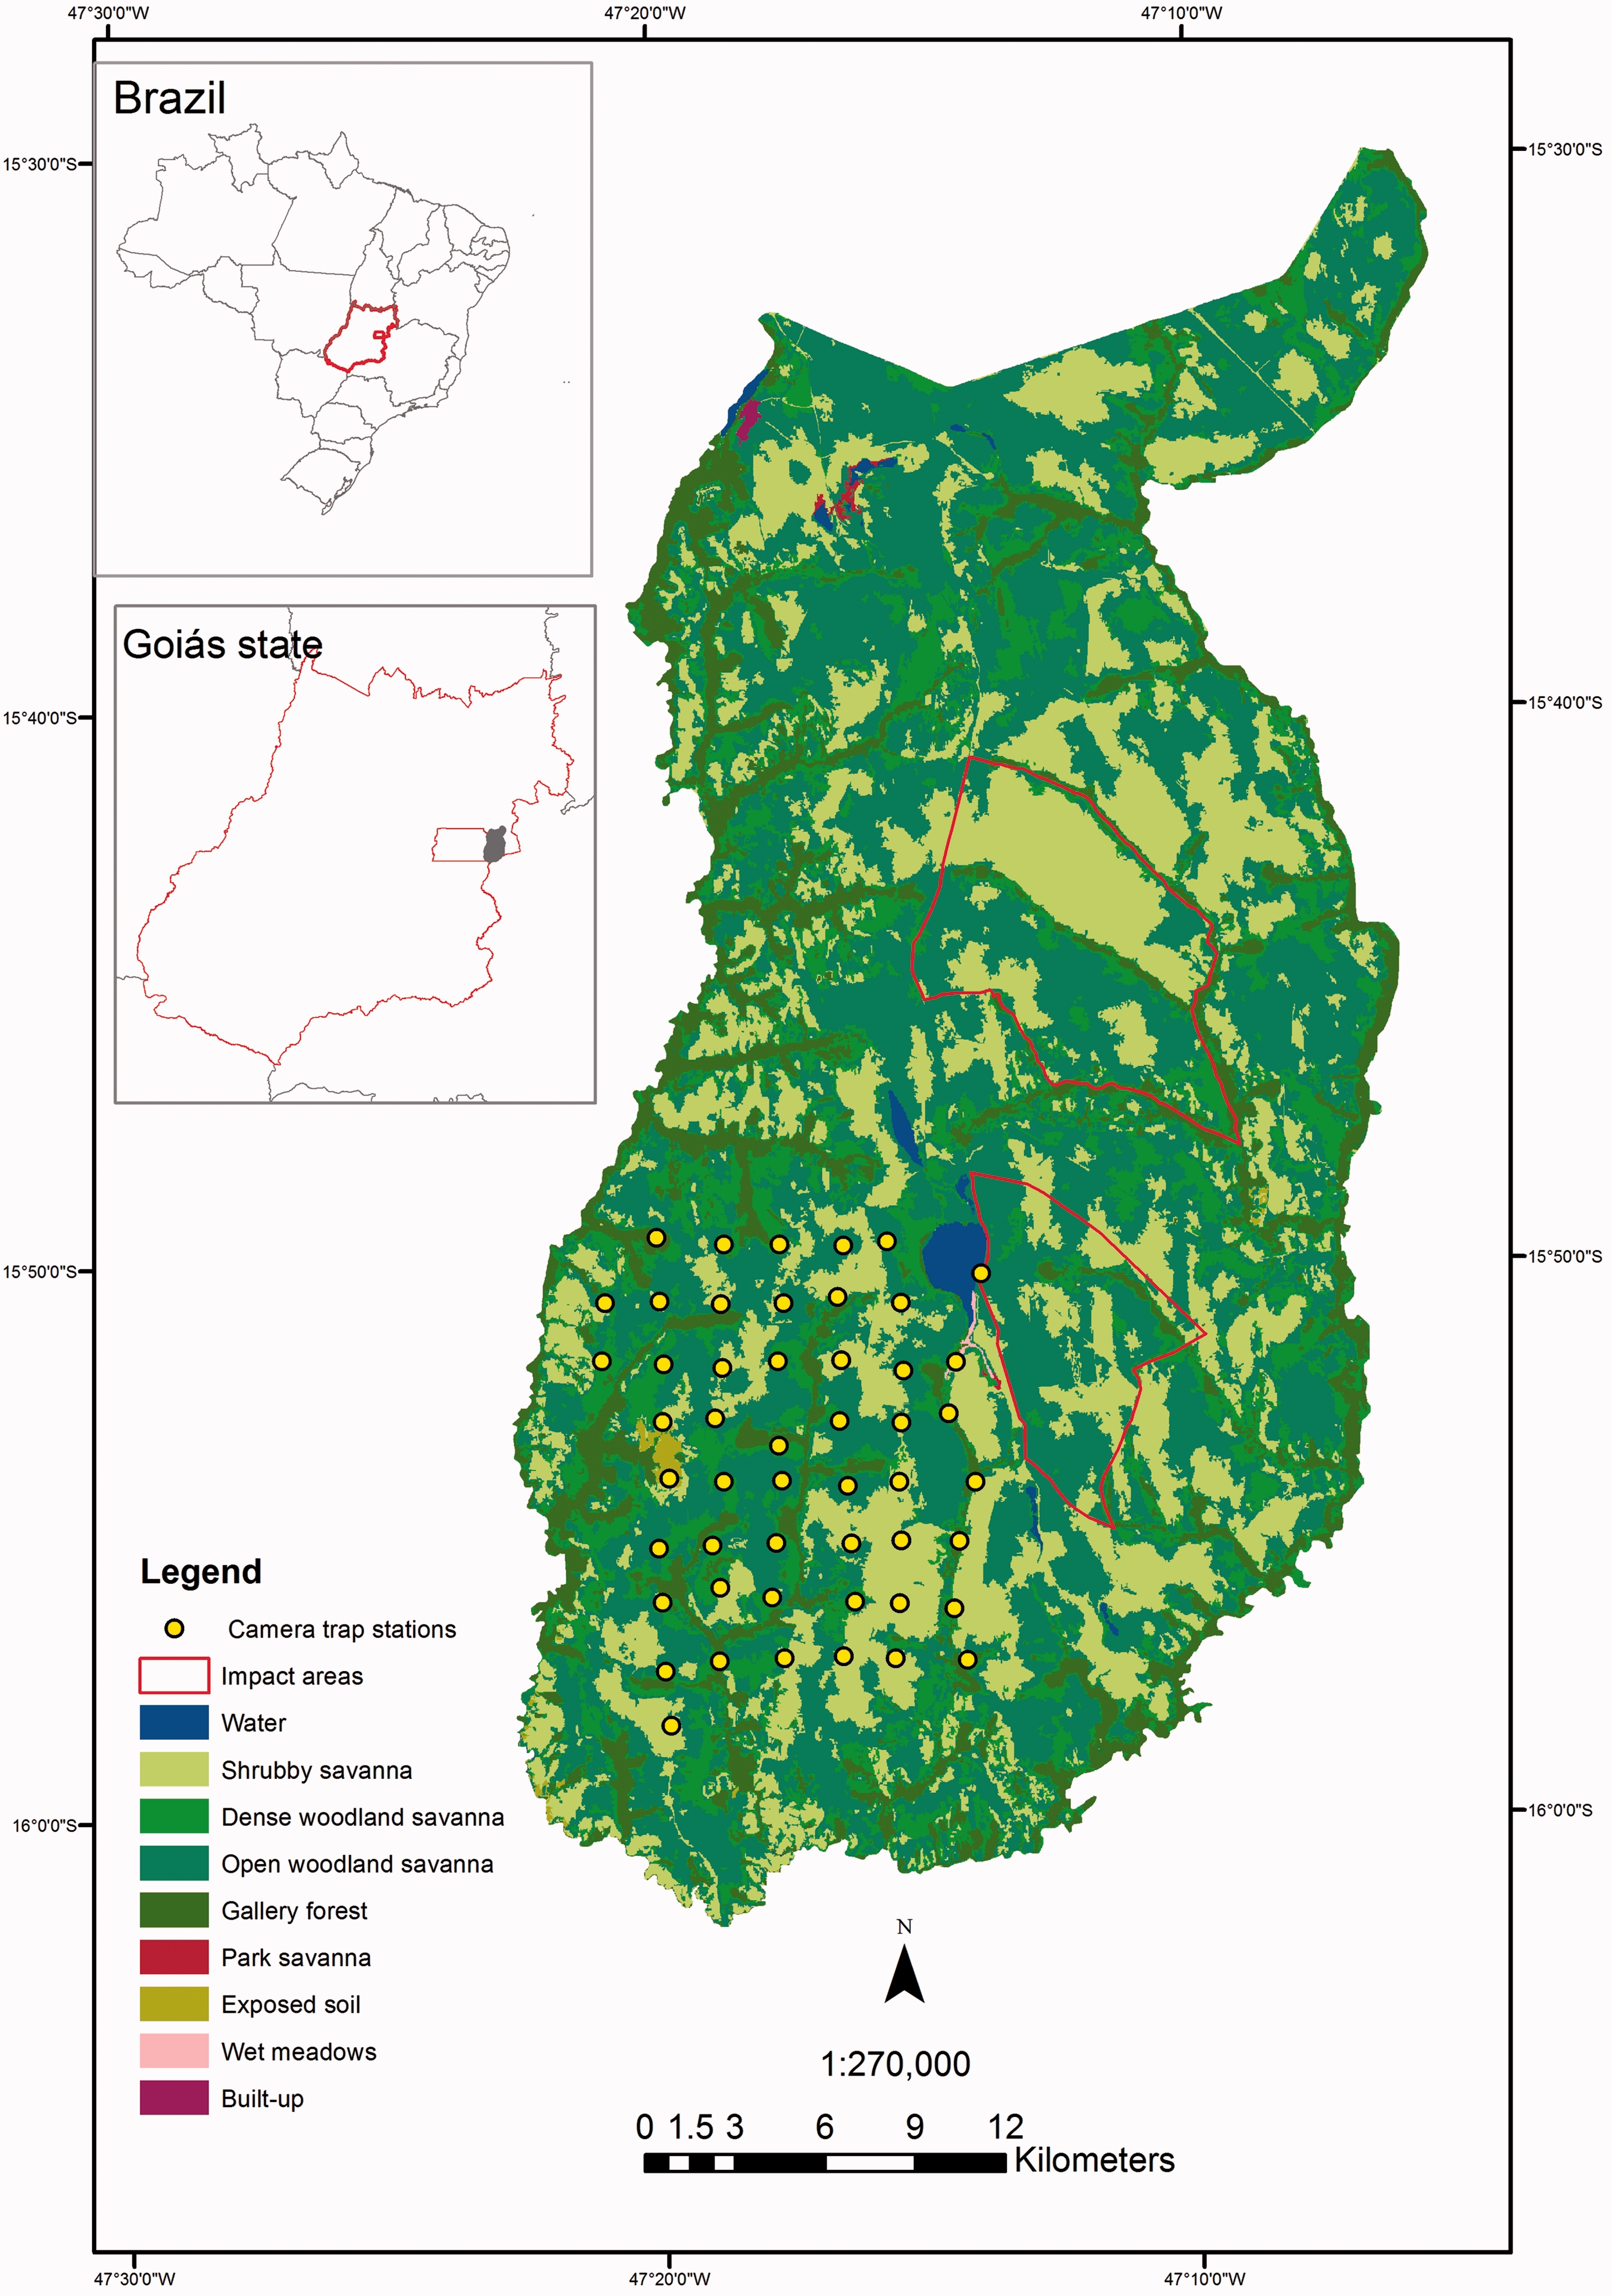 Intensity of the HFP across Brazil and four Neotropical